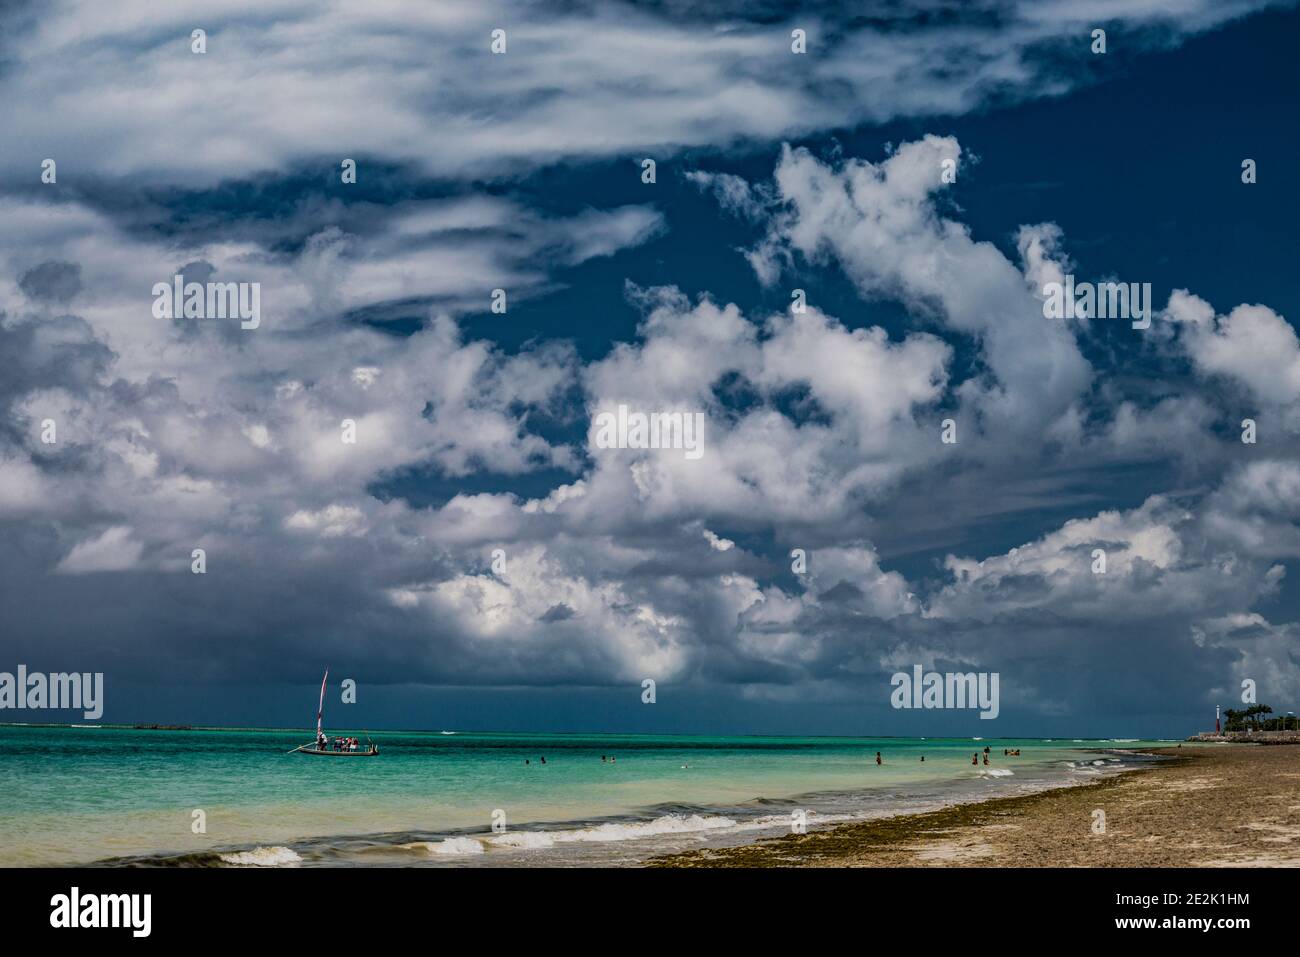 Sky of large clouds and clear waters of Maceió, Brazil Stock Photo